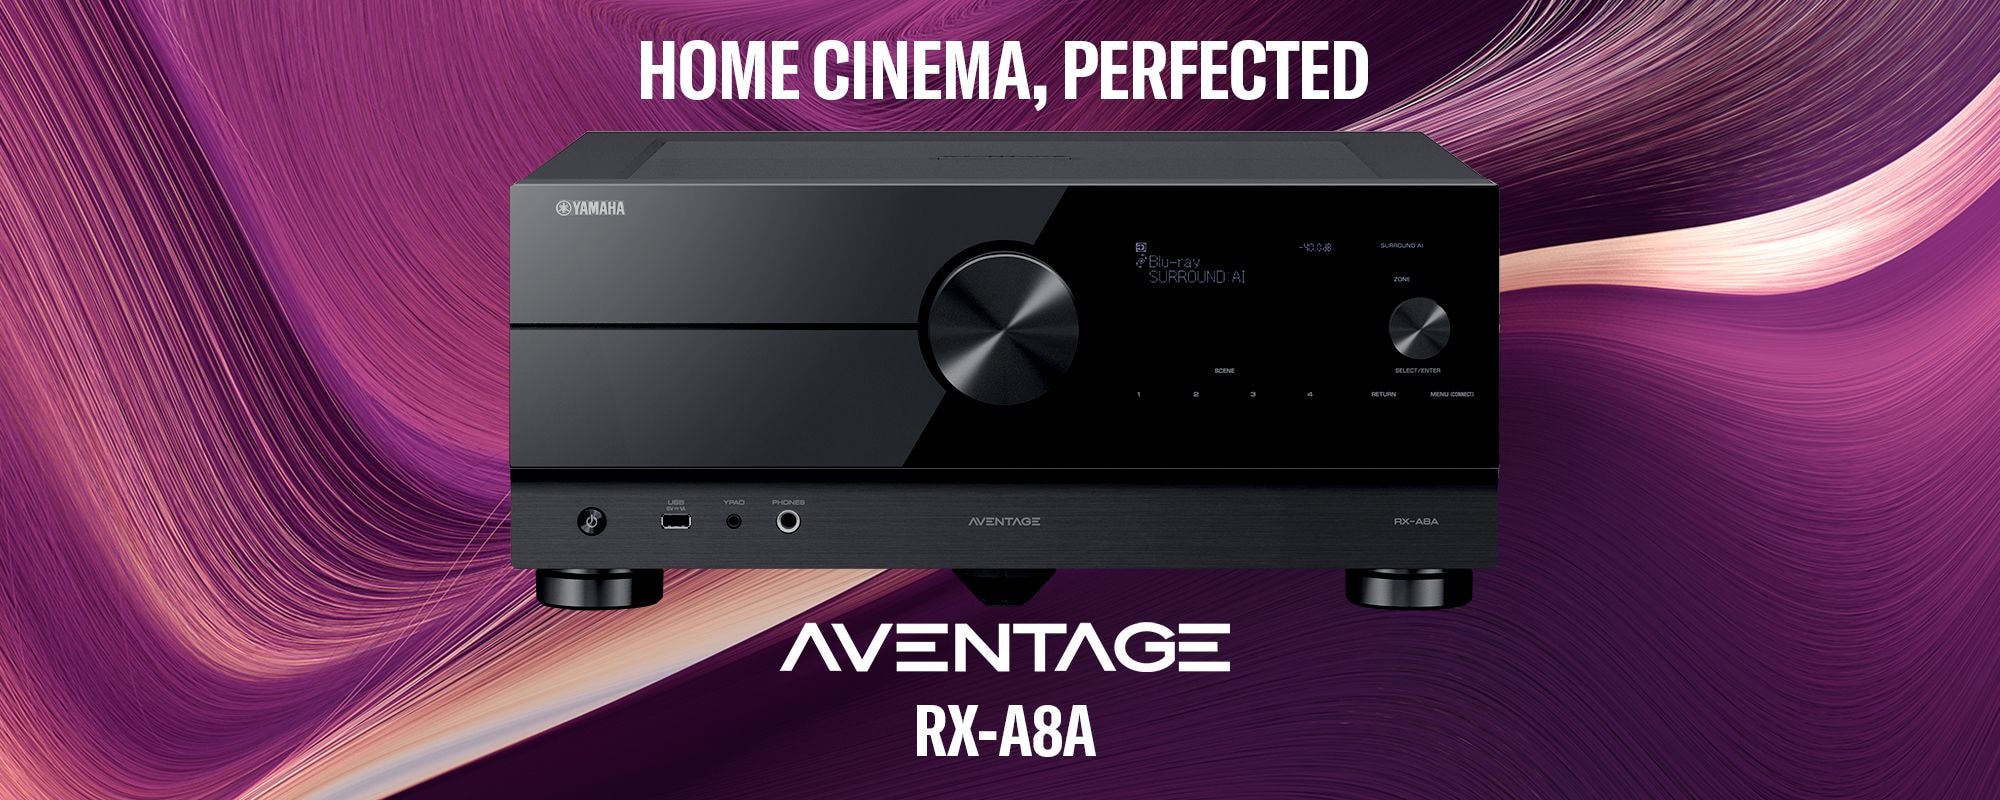 Home Cinema, Perfected - Yamaha AVENTAGE RX-A8A 11.2-Channel AV Receiver with 8K HDMI and …